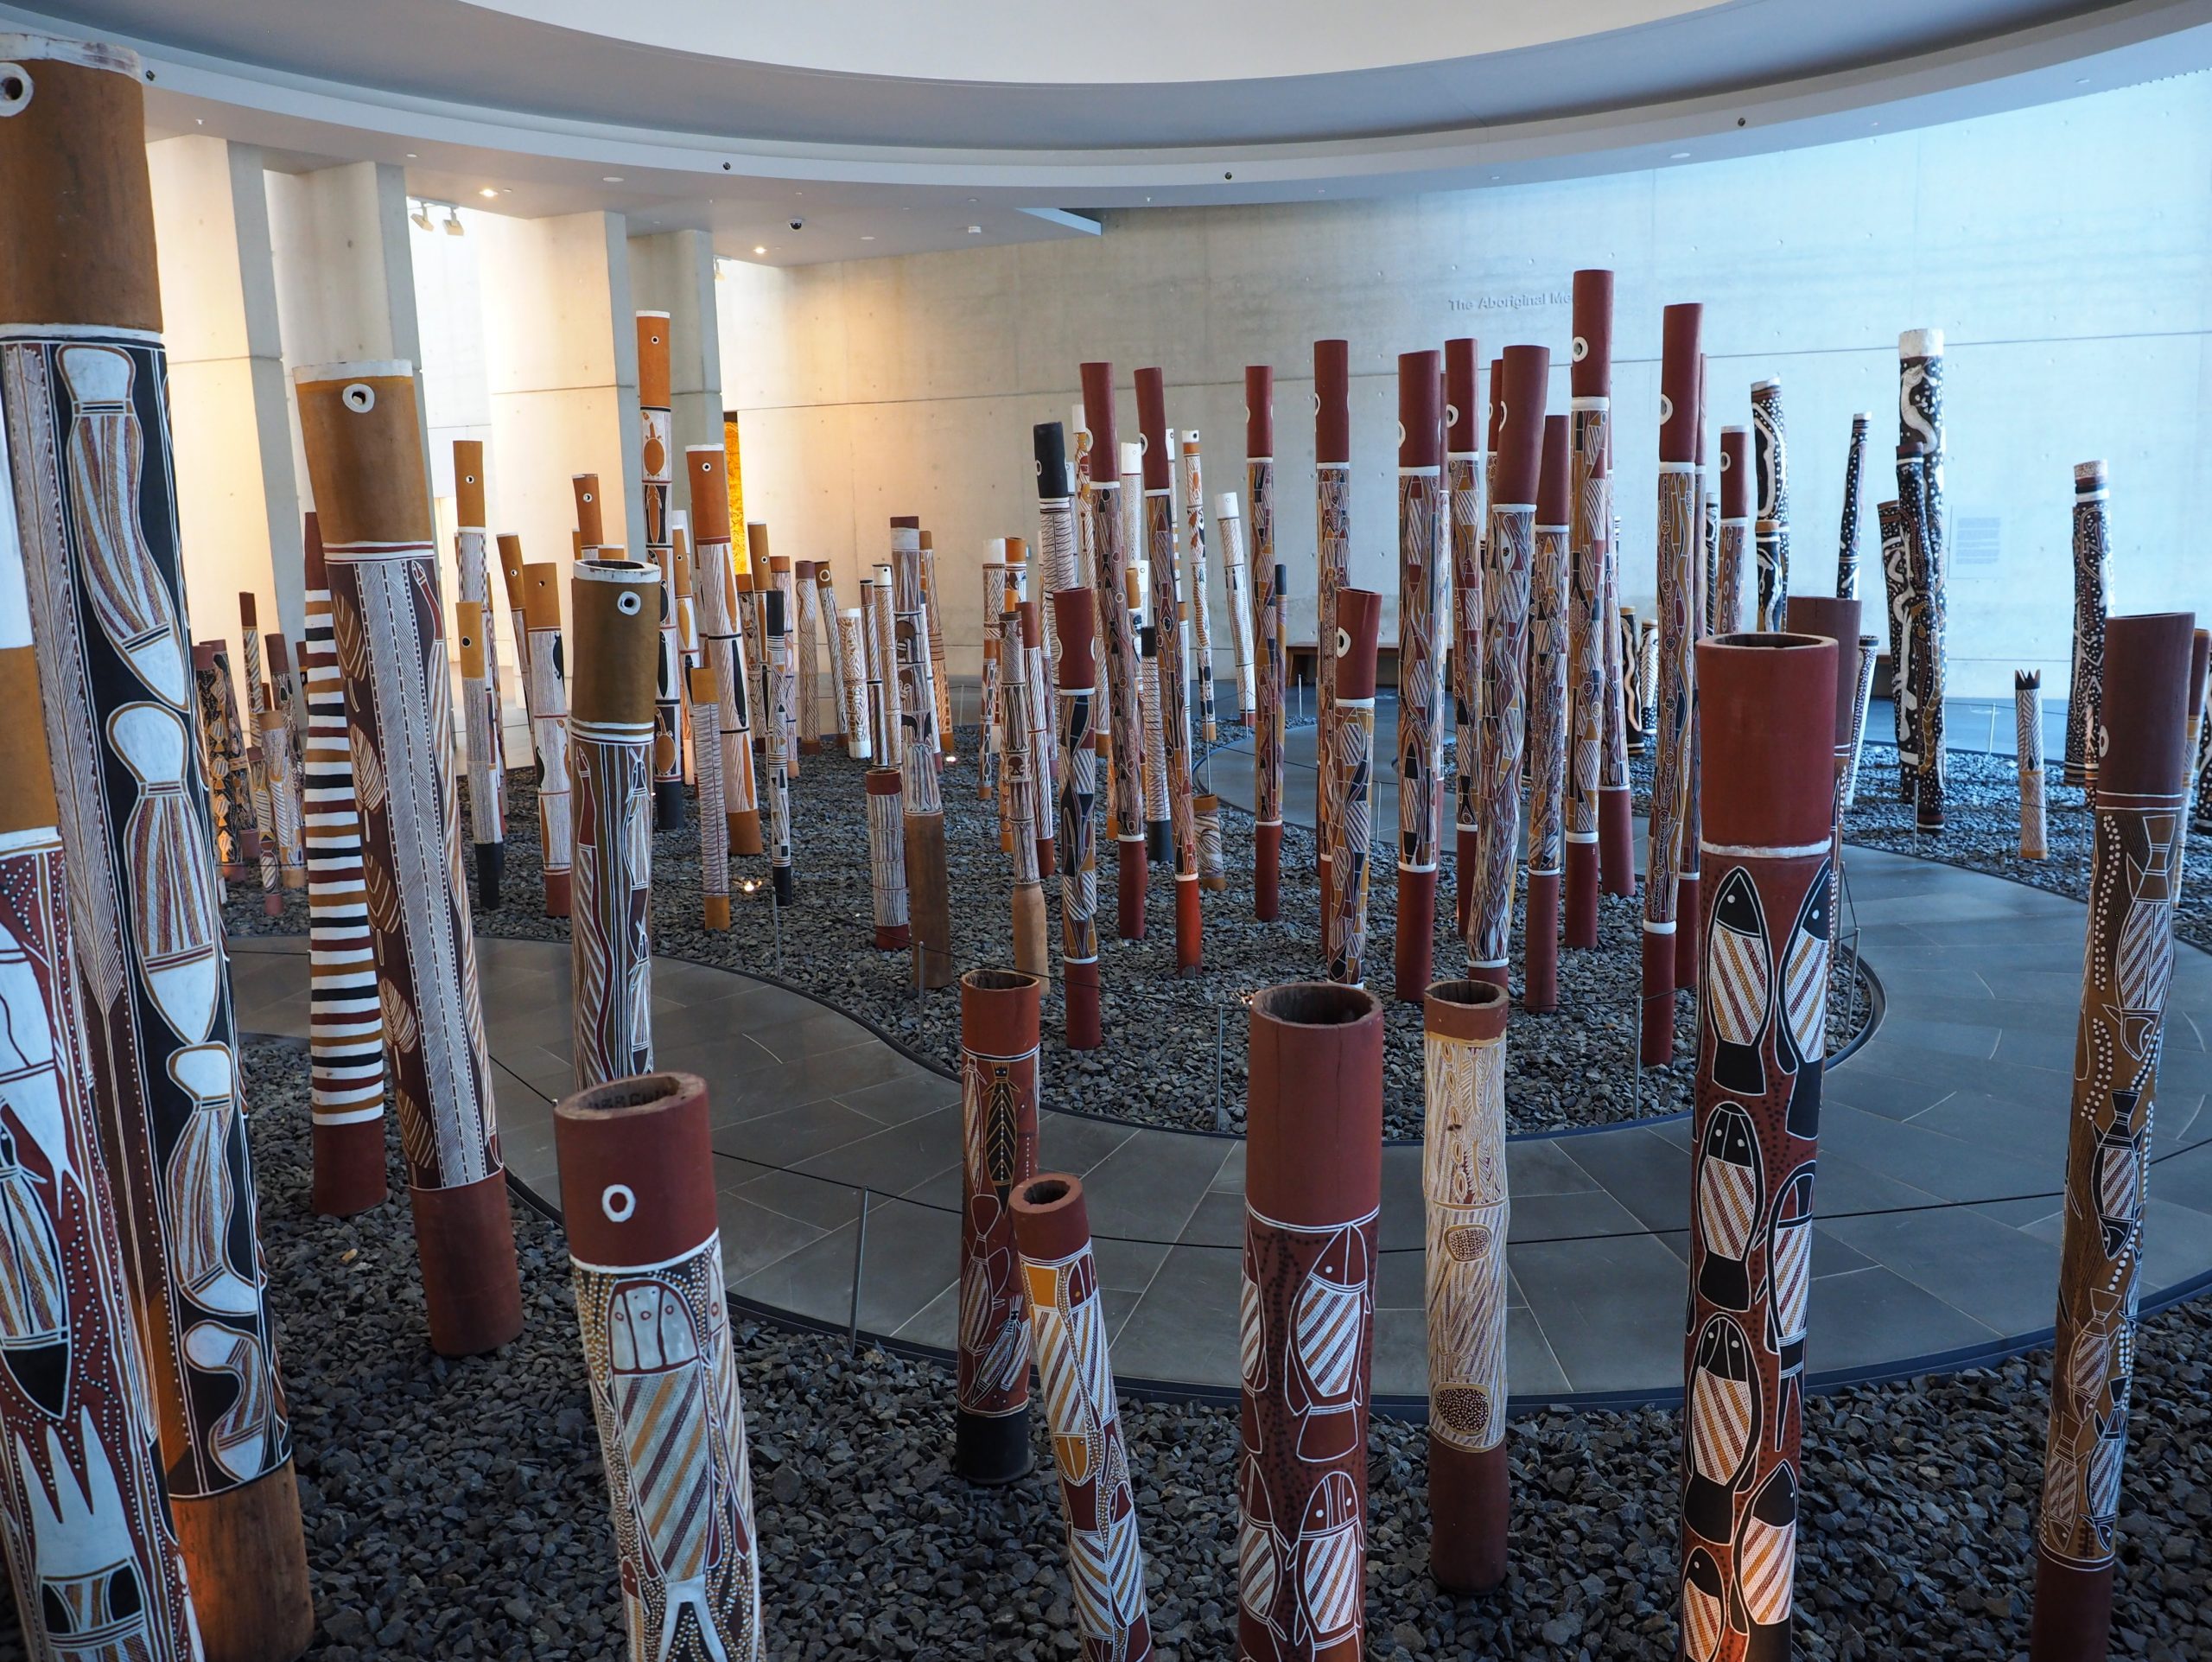 boriginal Memorial viewed from the foyer of the National Gallery of Australia. It's a collection of logs painted with aborginal art